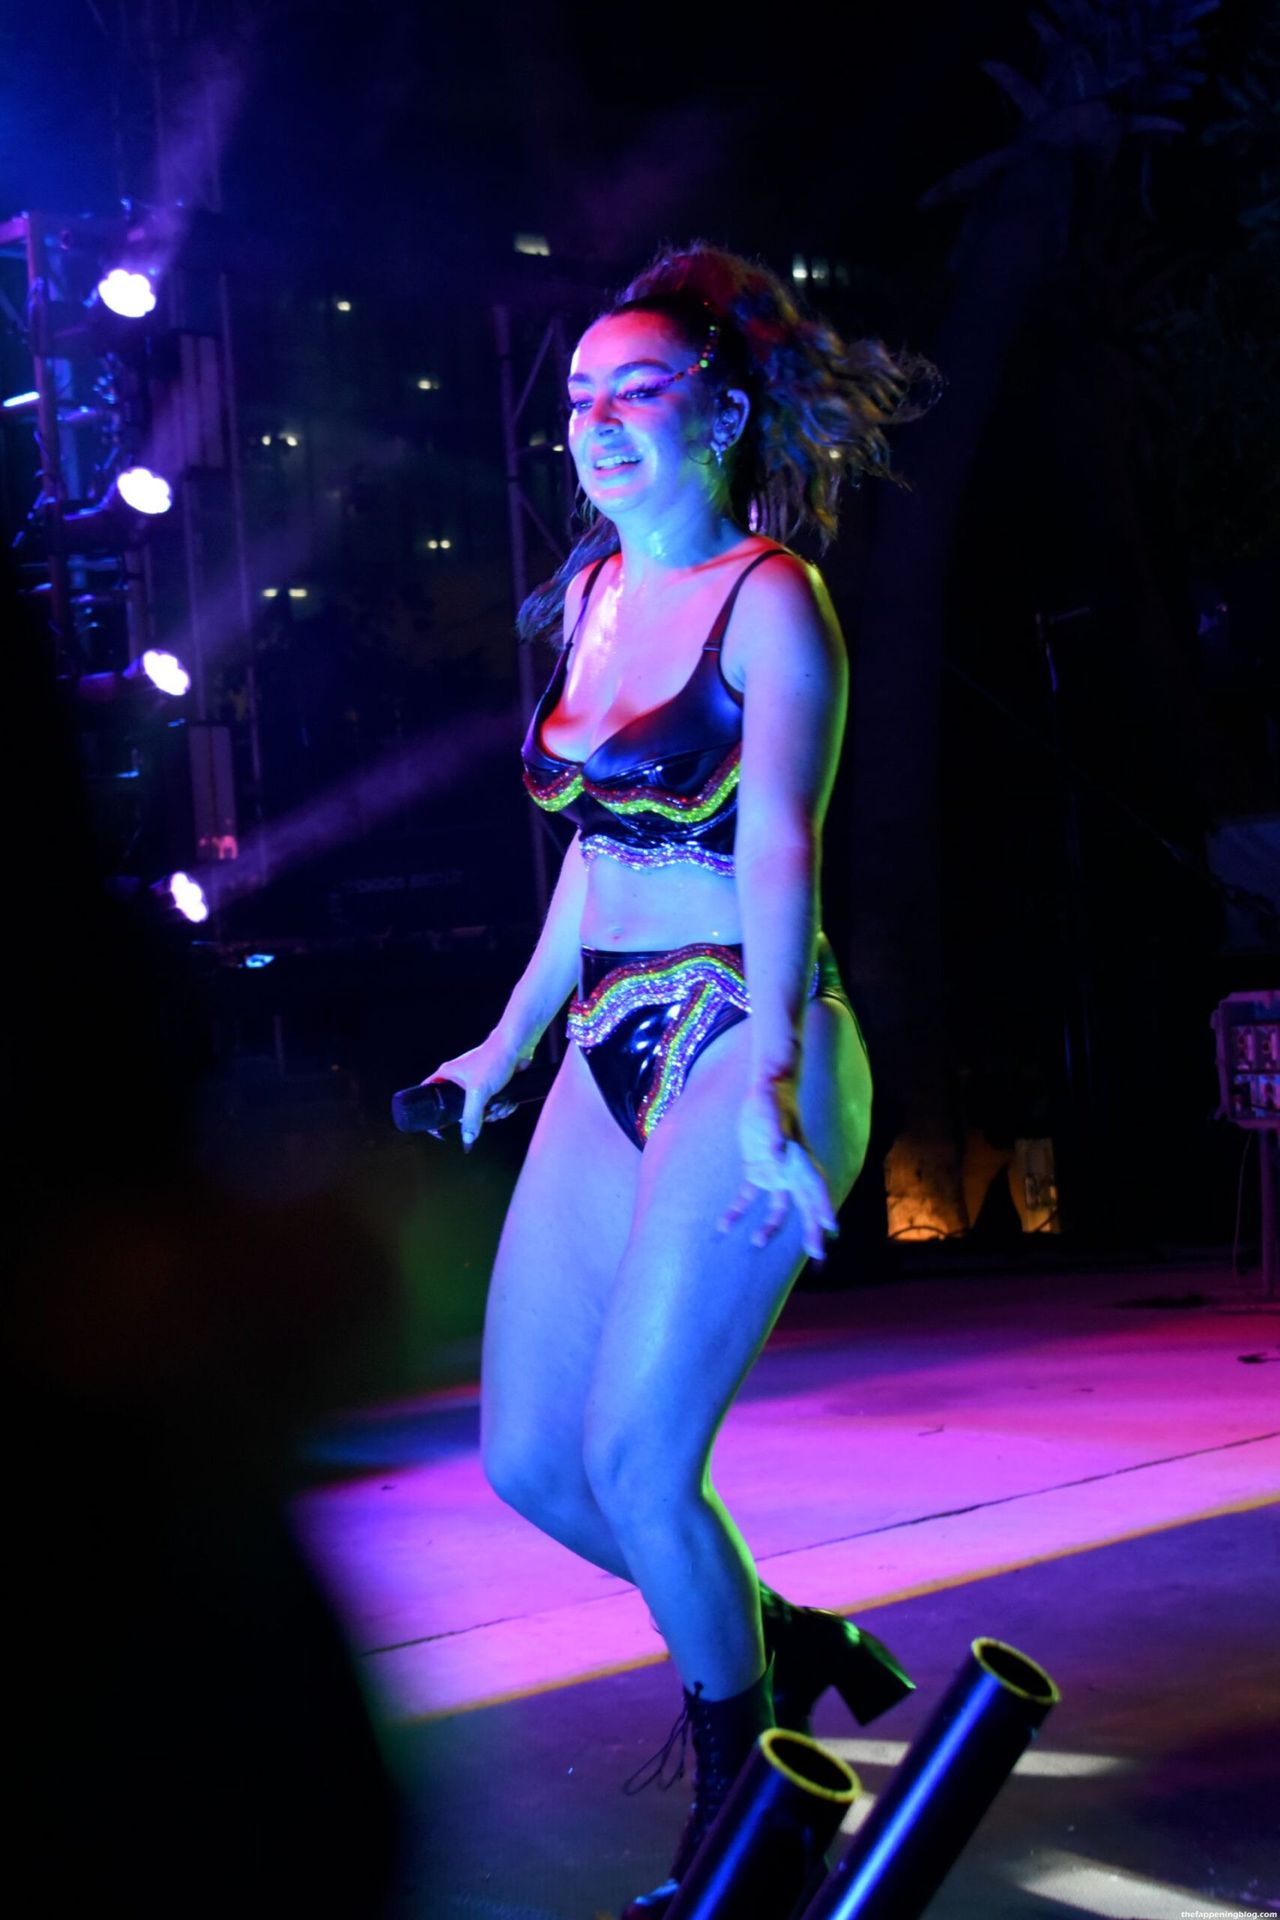 Charli-XCX-Sexy-on-Stage-14-thefappeningblog.com_.jpg